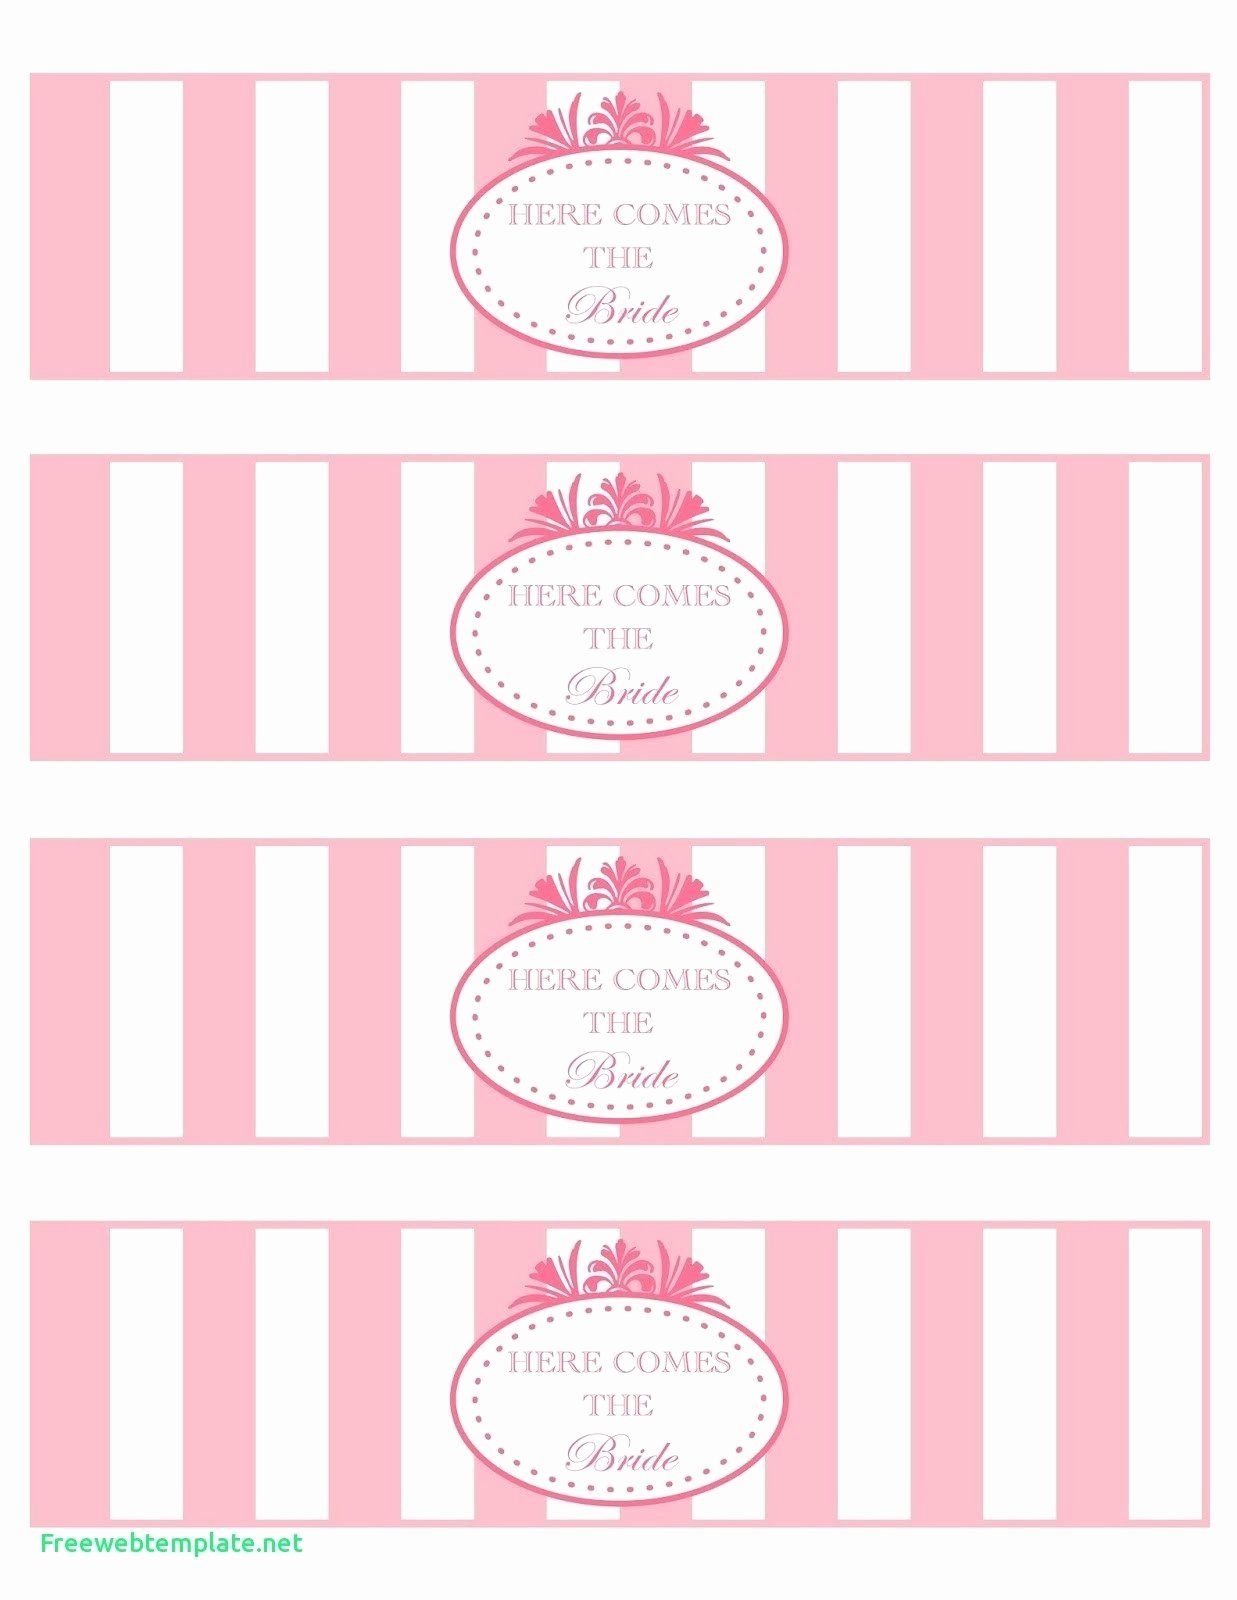 Free Water Bottle Label Template Baby Shower Fresh Printable Water B Water Bottle Labels Template Printable Water Bottle Labels Water Bottle Labels Baby Shower - Free Printable Baby Shower Labels and Tags